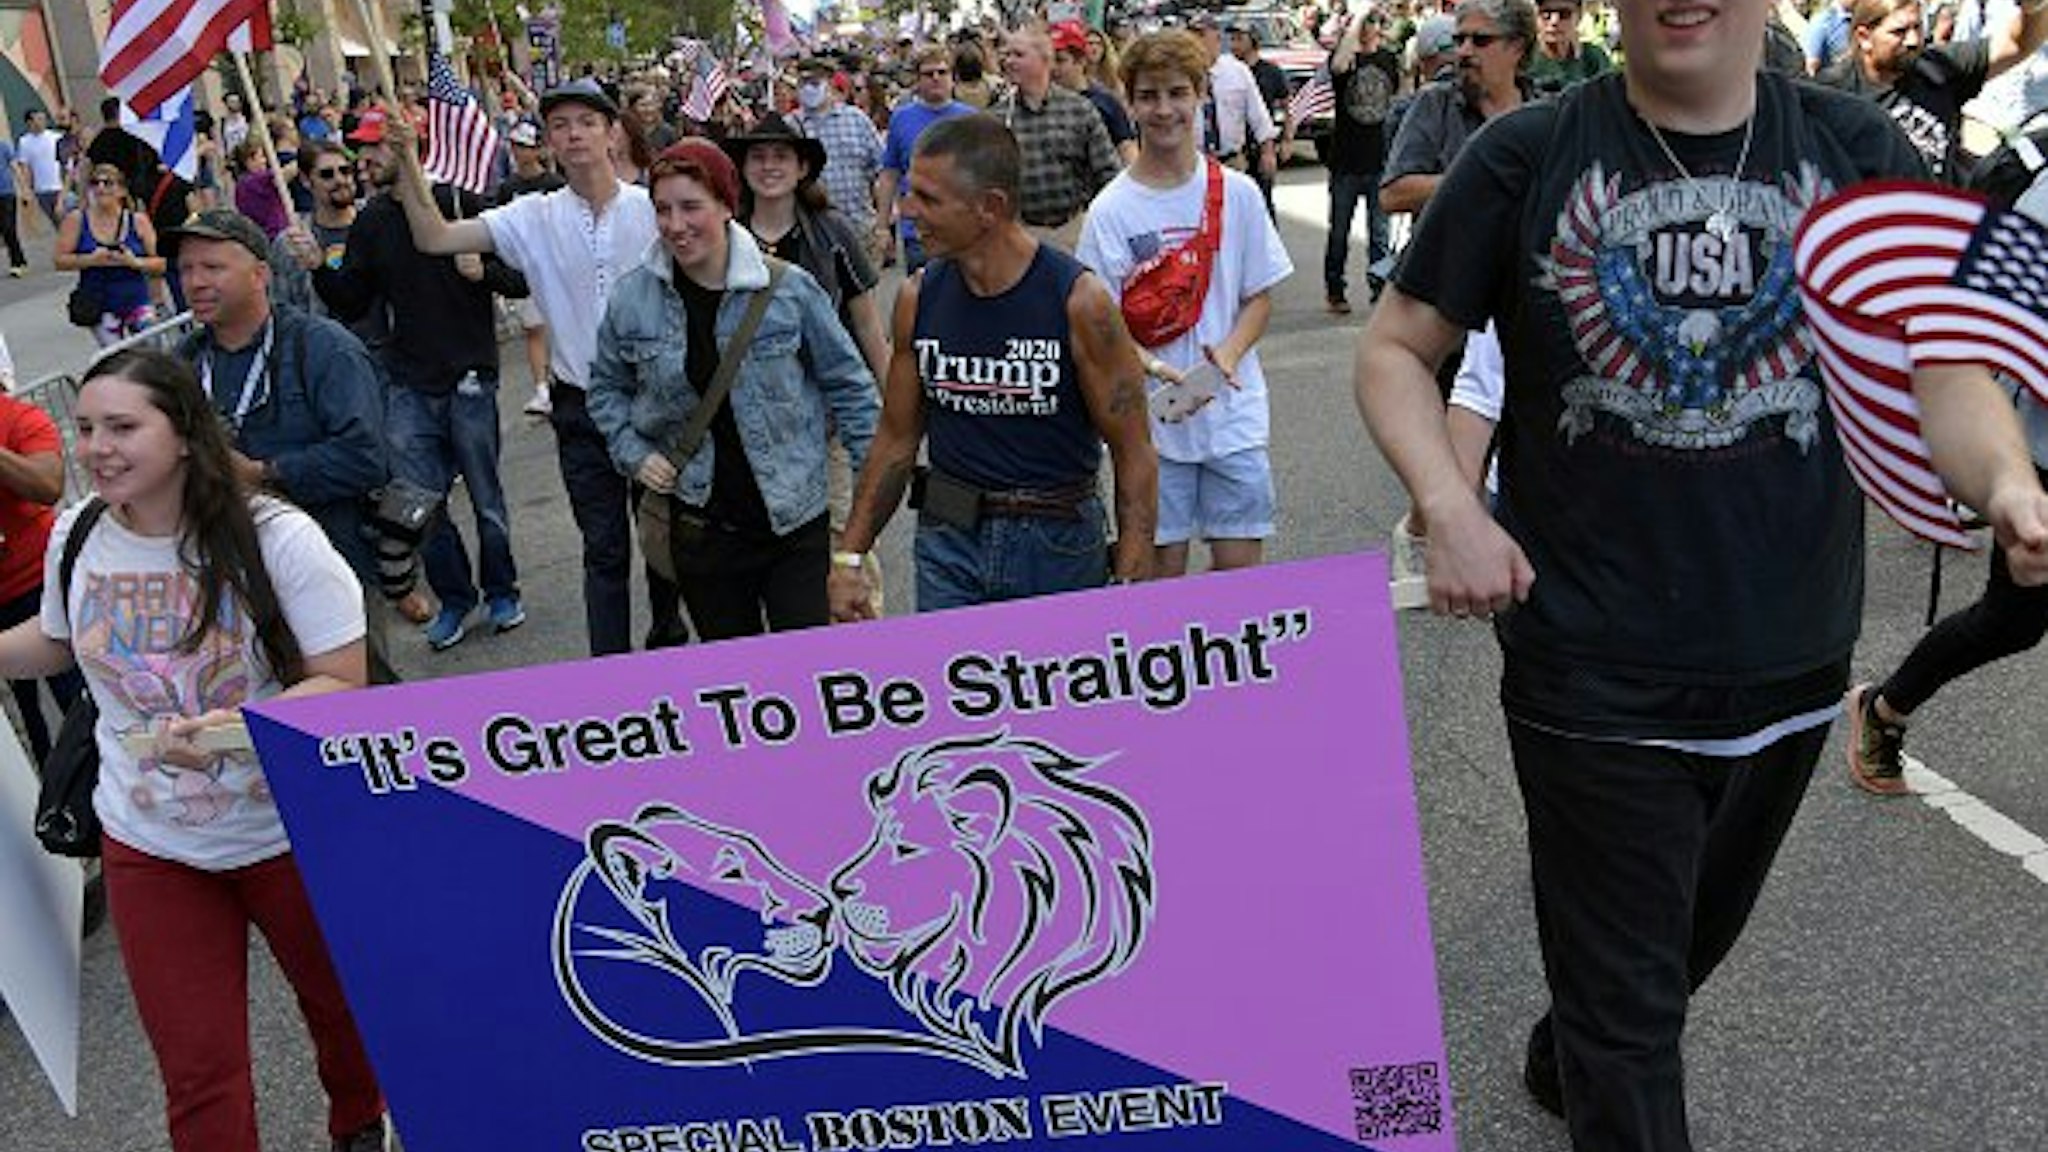 Parade participants are seen at the Boston Straight Pride Parade and Rally organized by Super Happy Fun America on August 31, 2019 in Boston, Massachusetts.